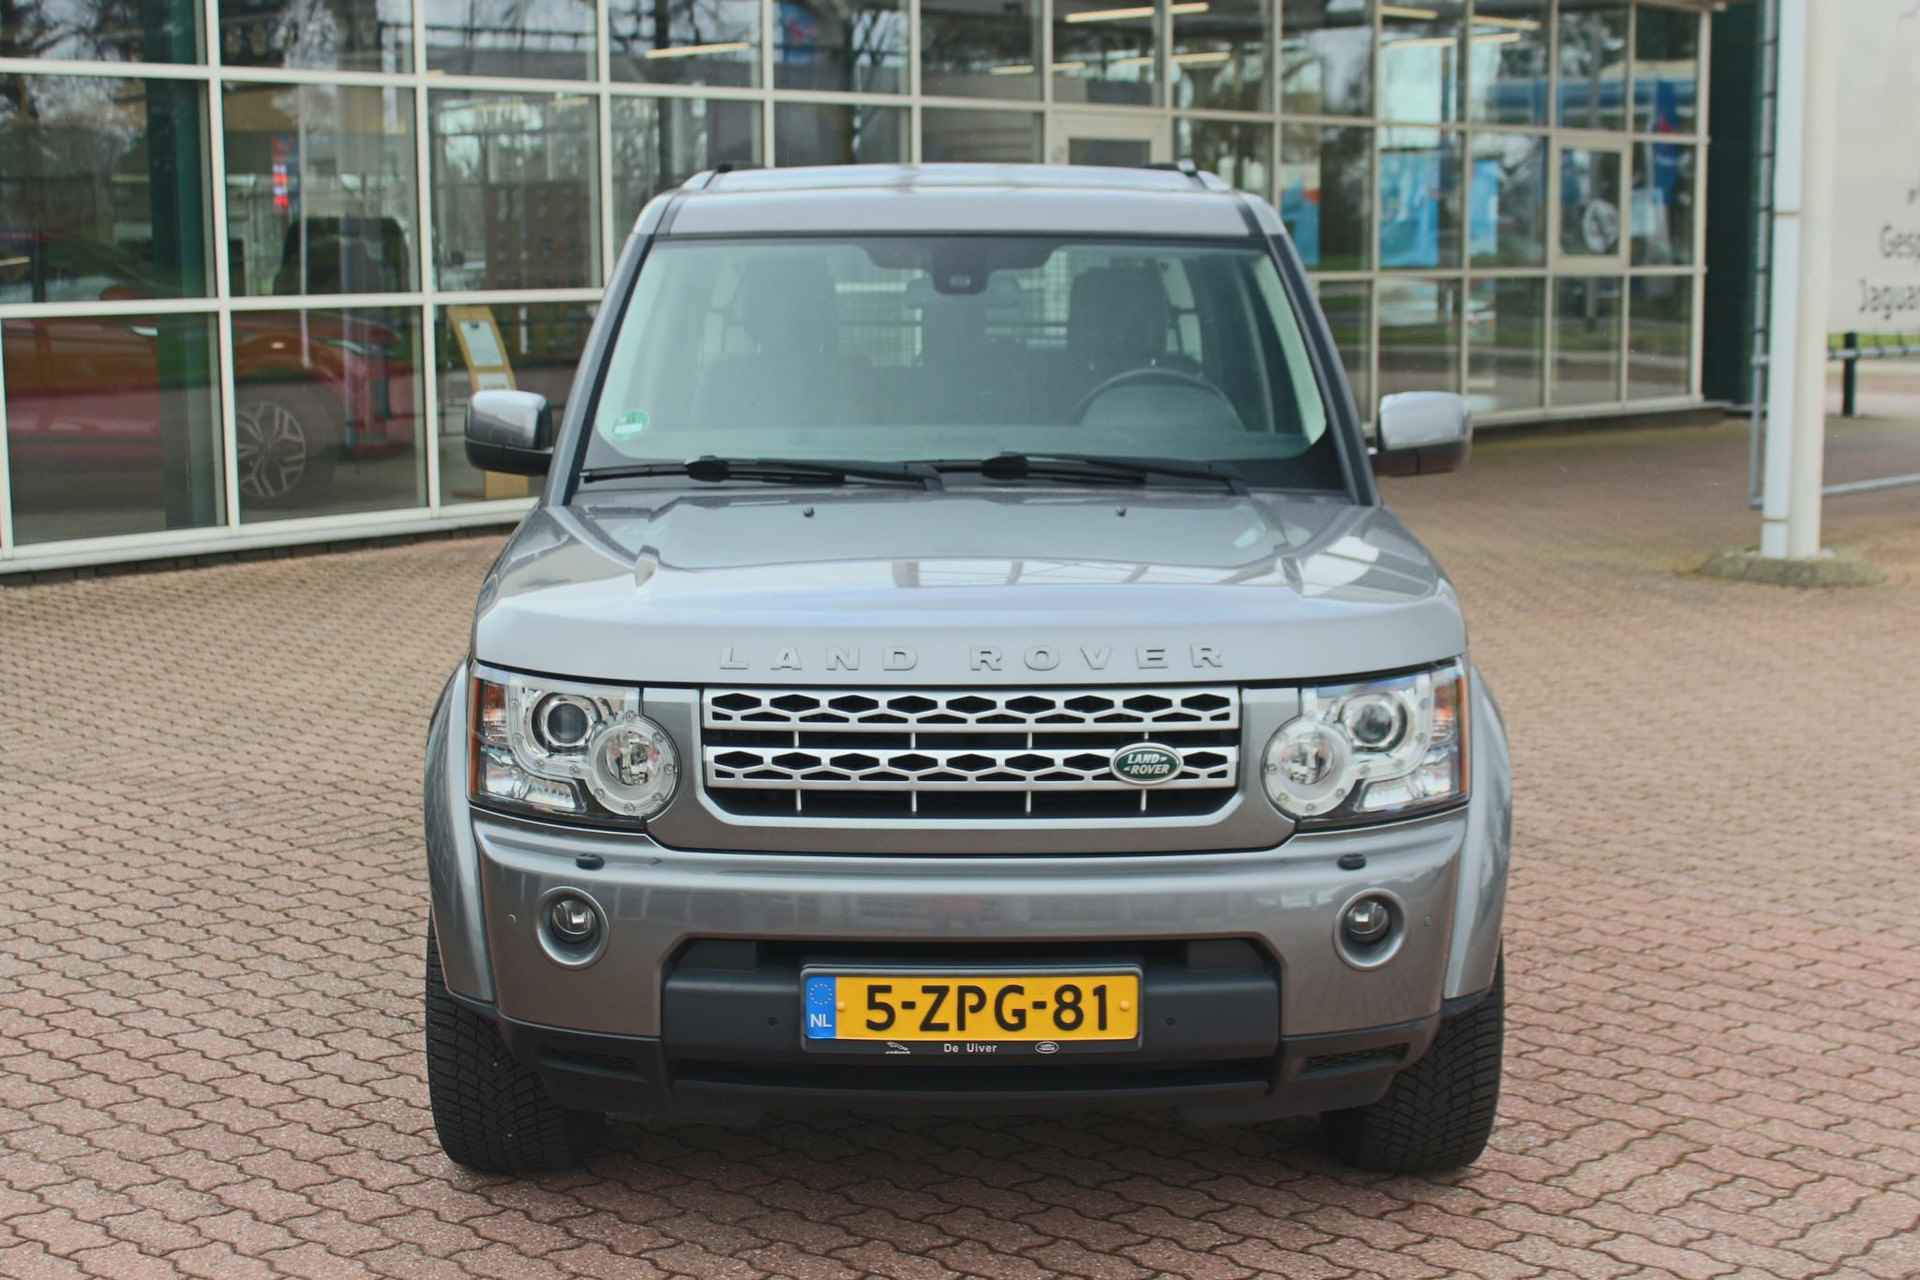 Land Rover Discovery 3.0 SDV6 HSE 7 -Seater - 7/44